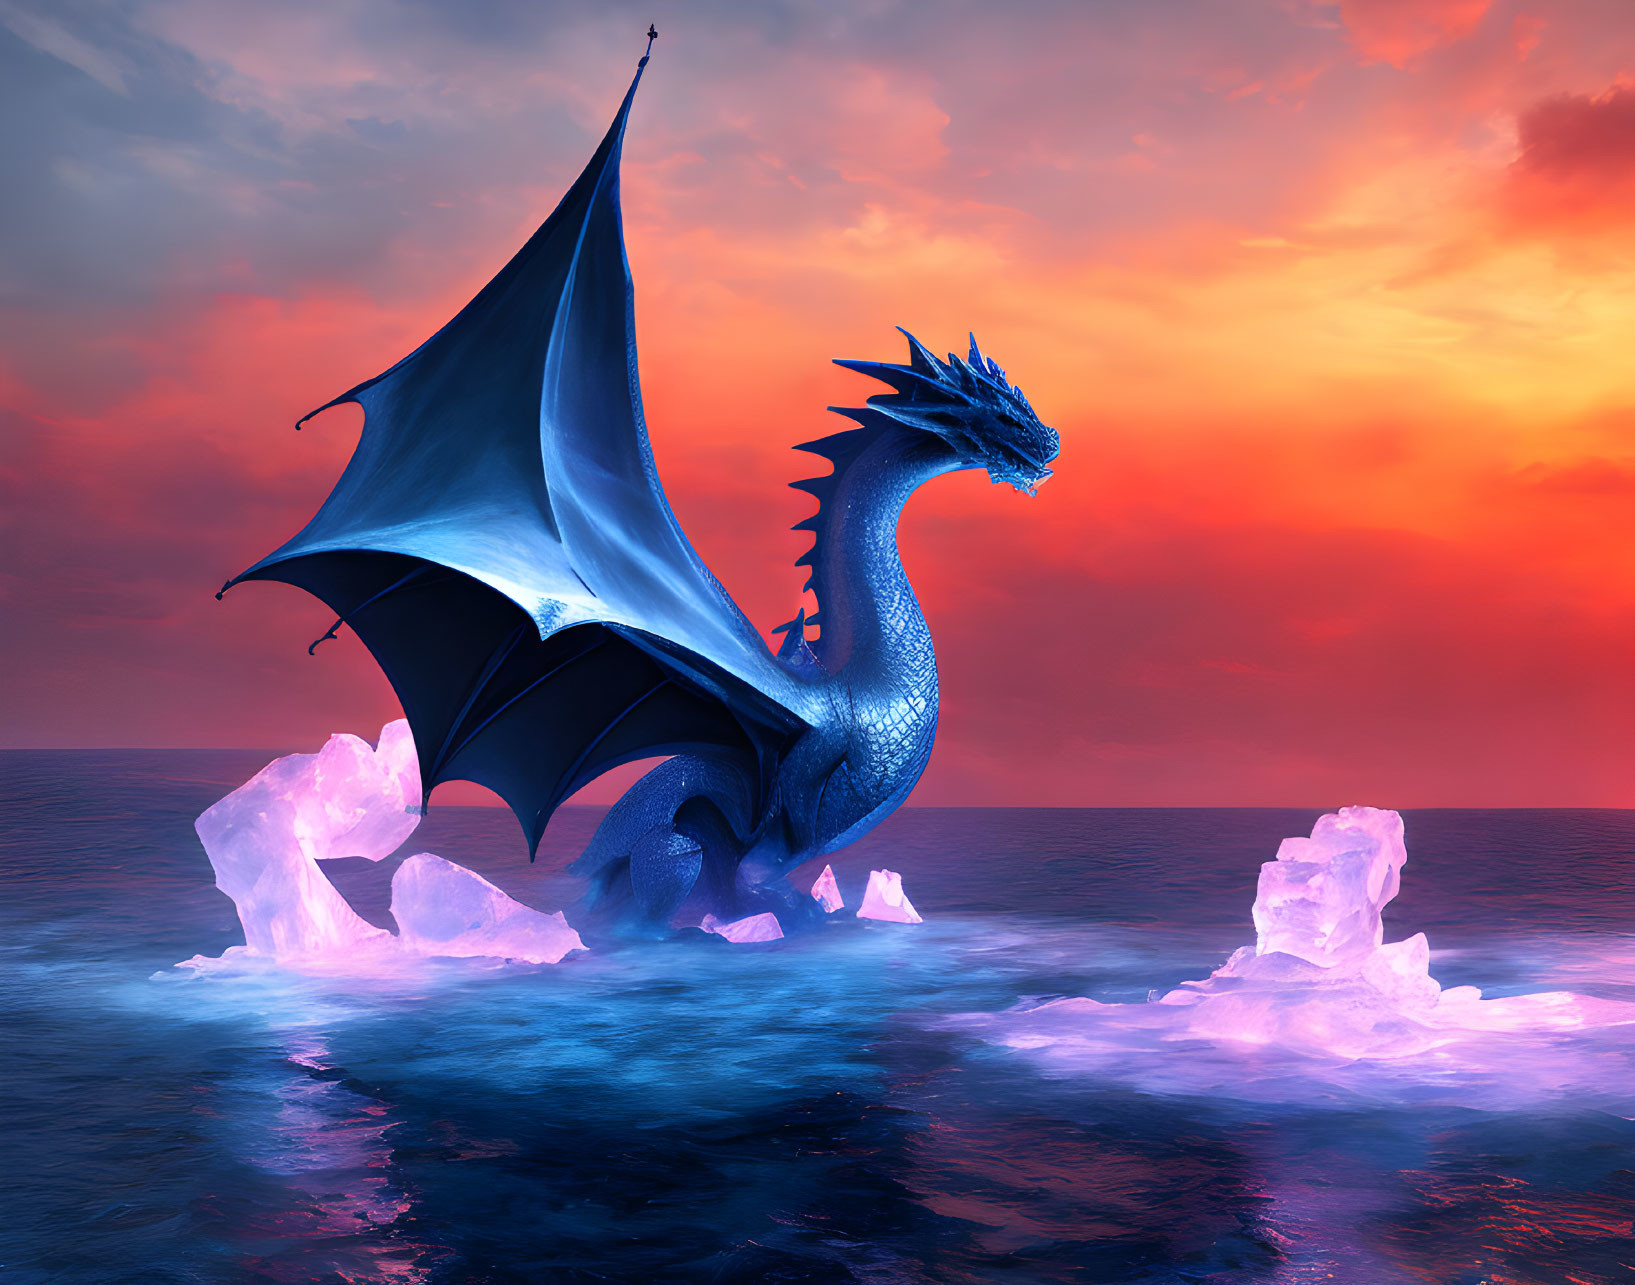 Blue dragon in icy waters under orange and pink sunset sky